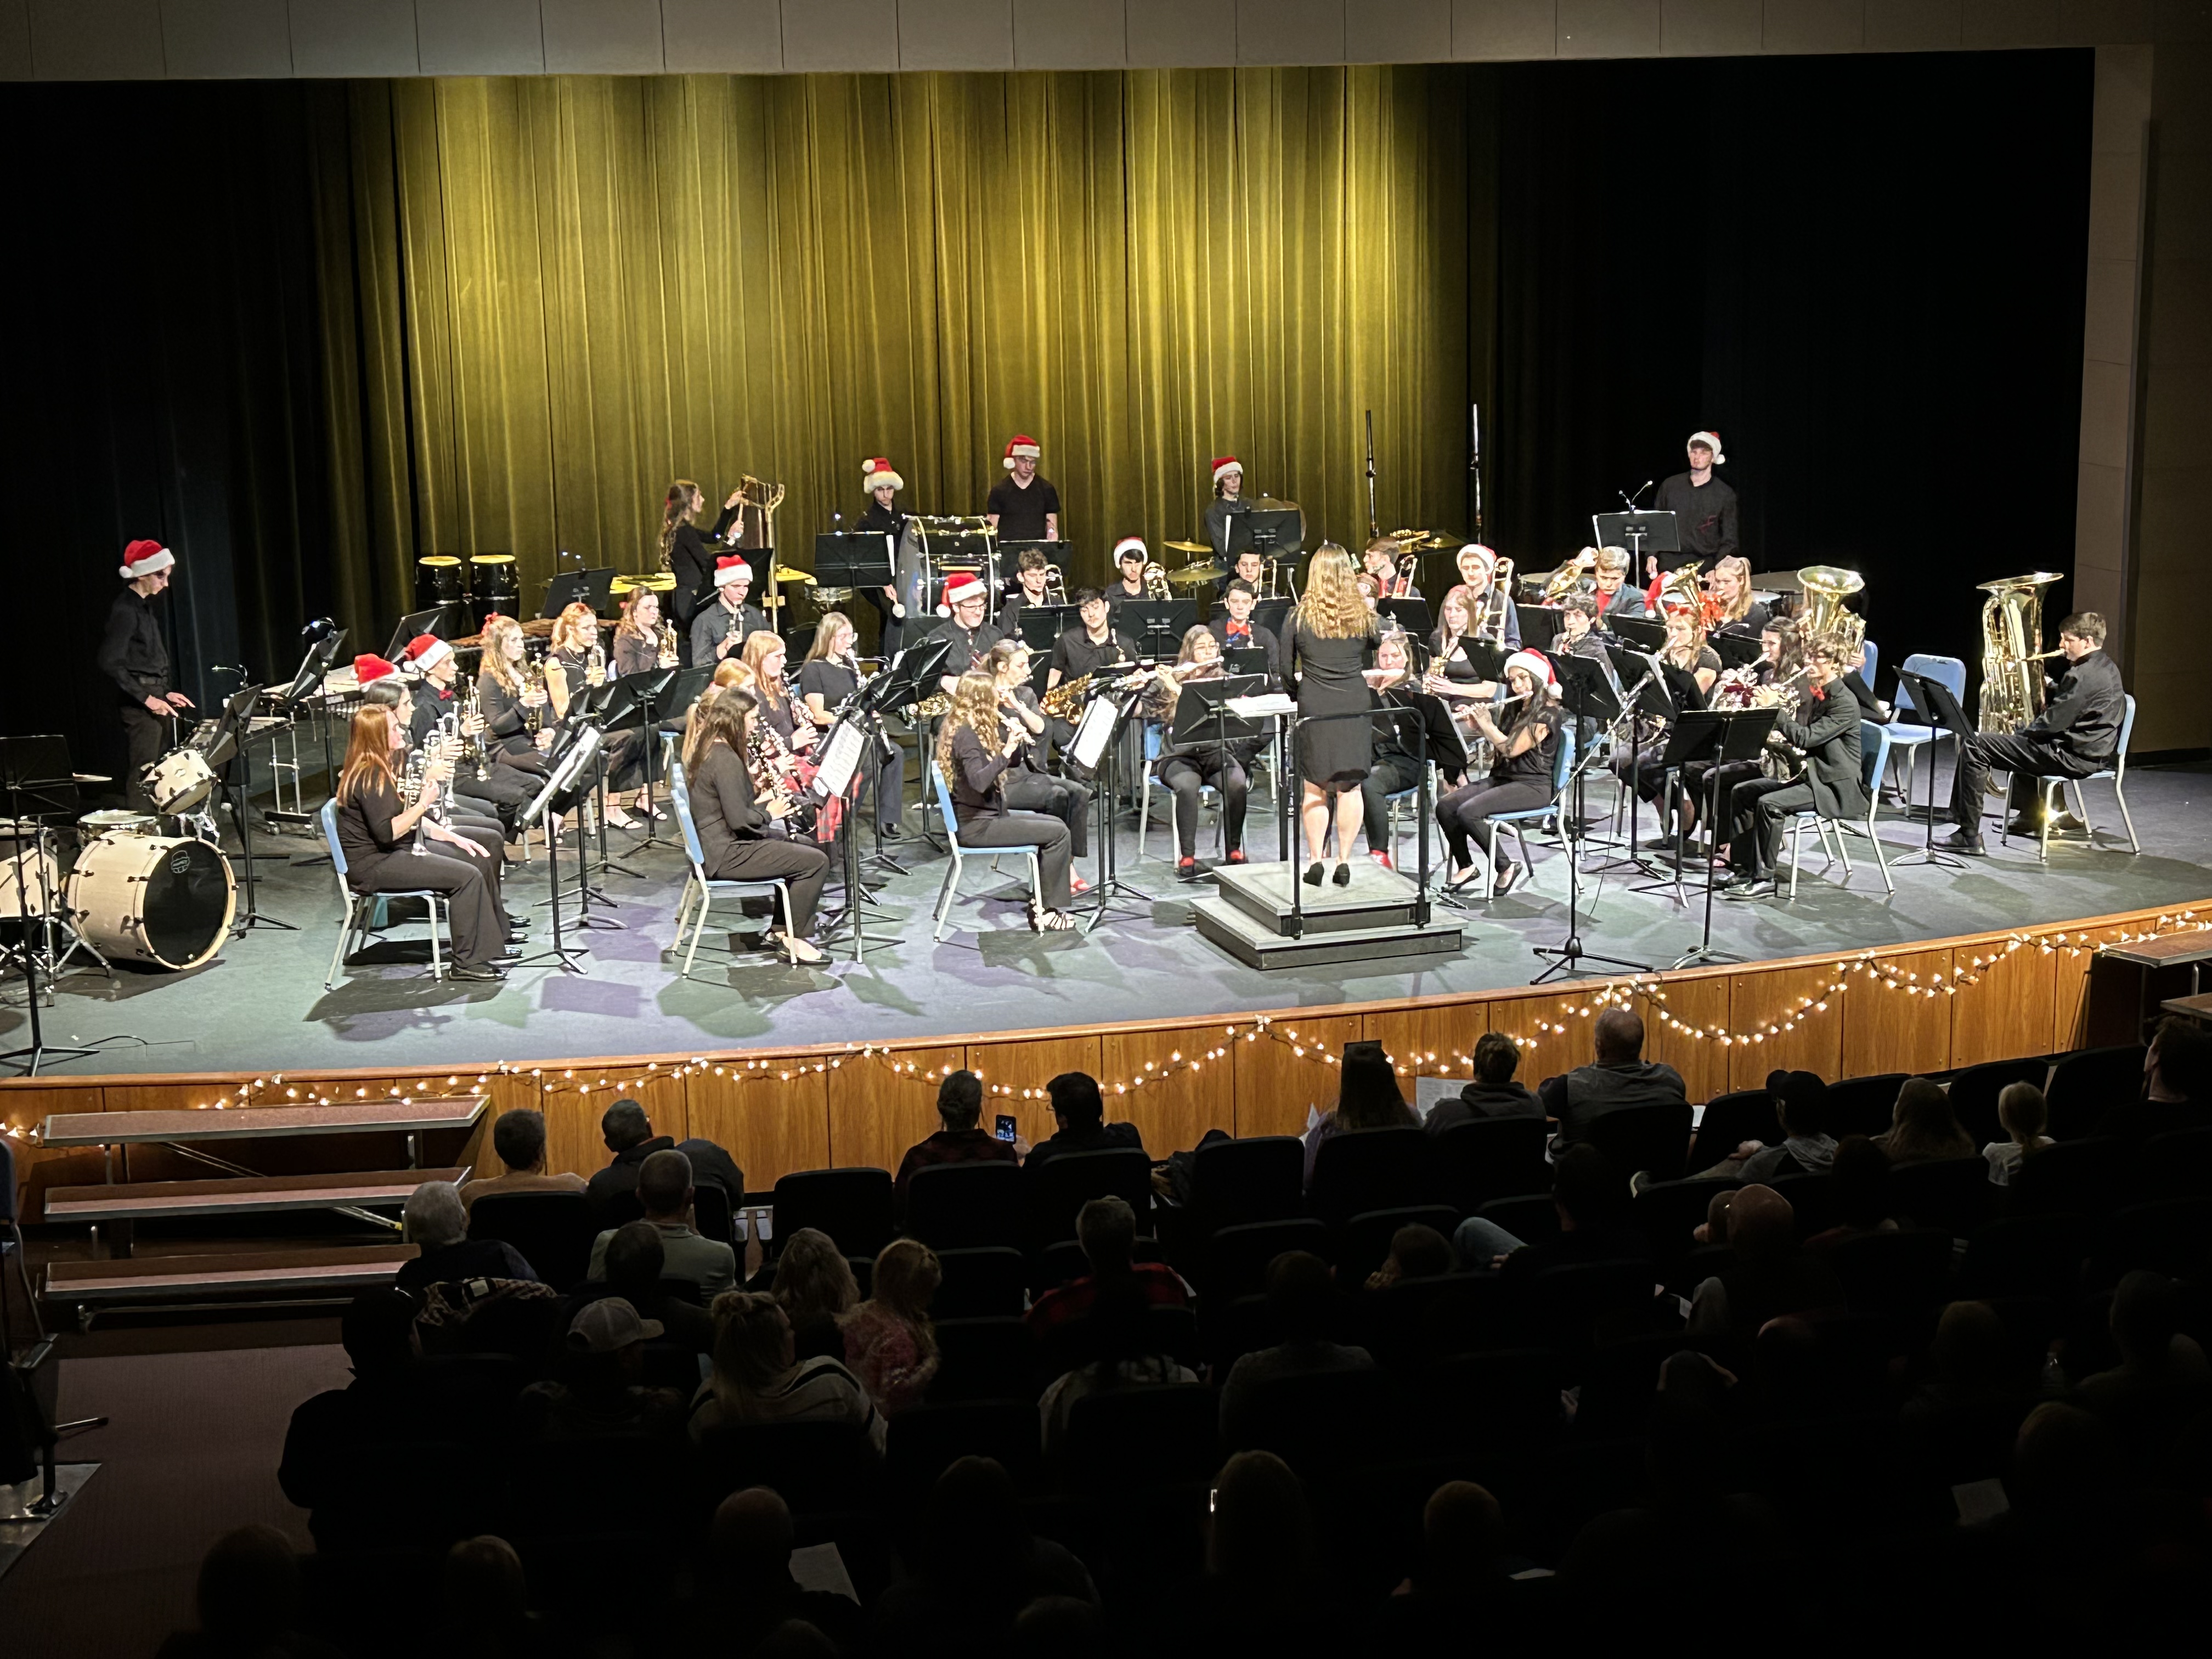 SHS Band at Christmas Concert on stage in the Betsy Dutton Theatre